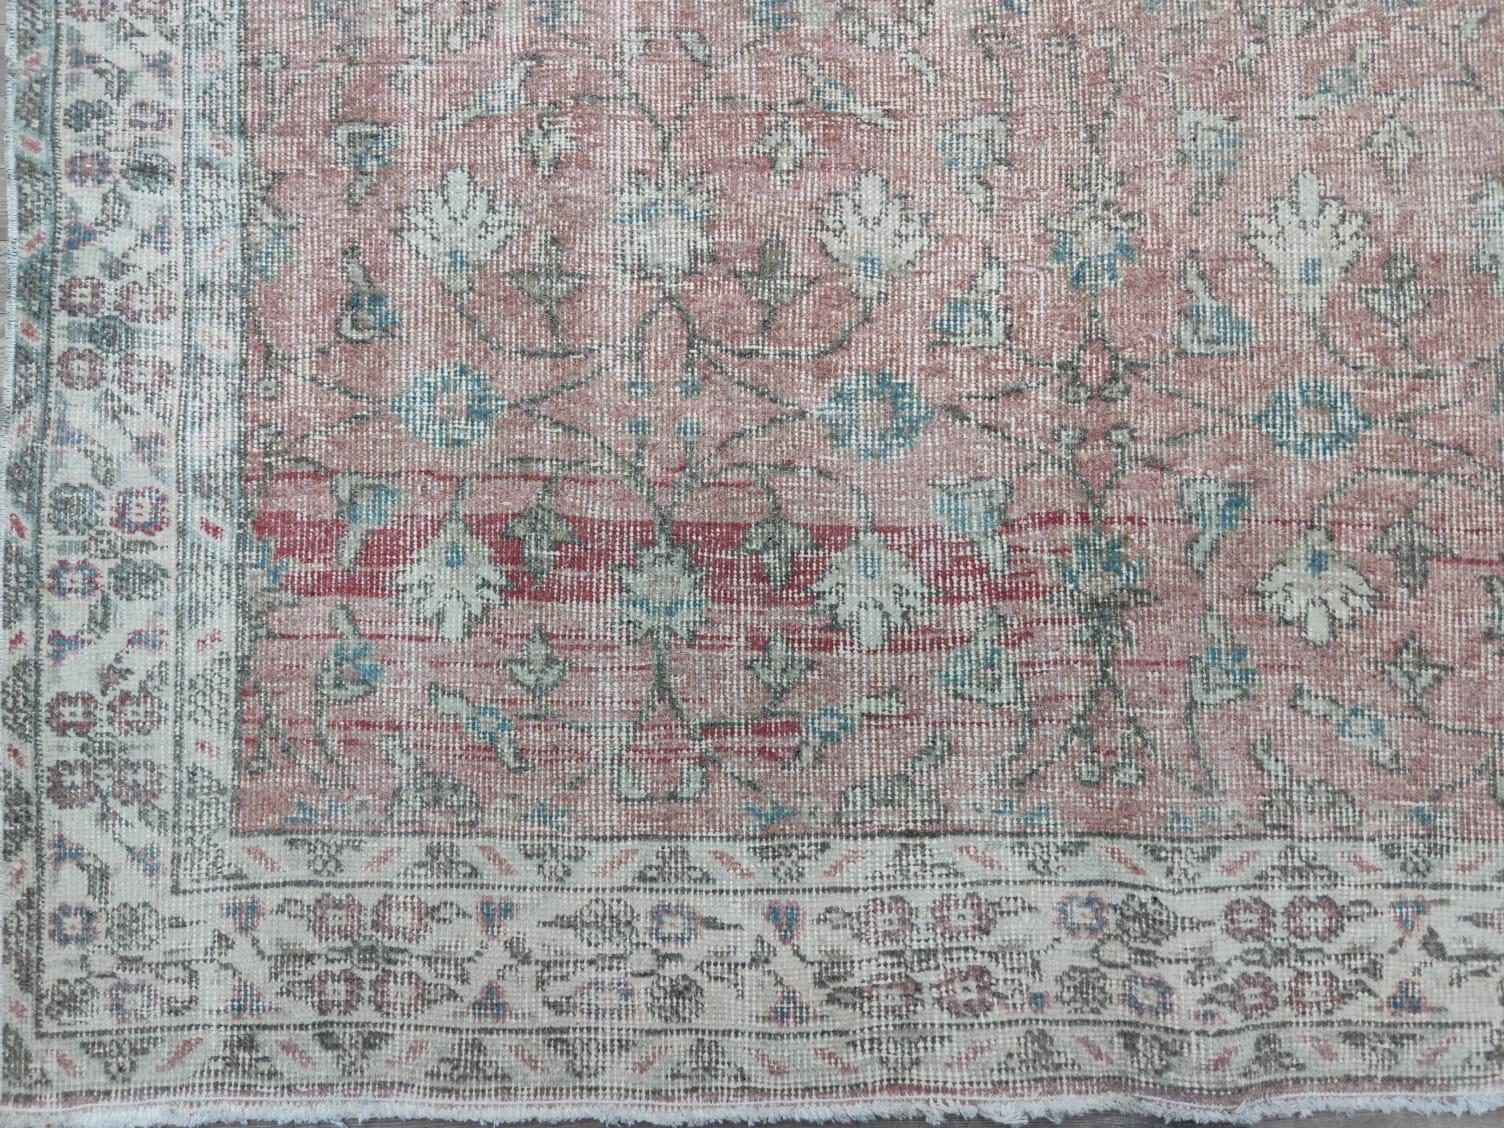 4.8x12.8 Ft Handmade Floral Patterned Vintage Turkish Runner Rug in Beige, Coral In Good Condition For Sale In Philadelphia, PA